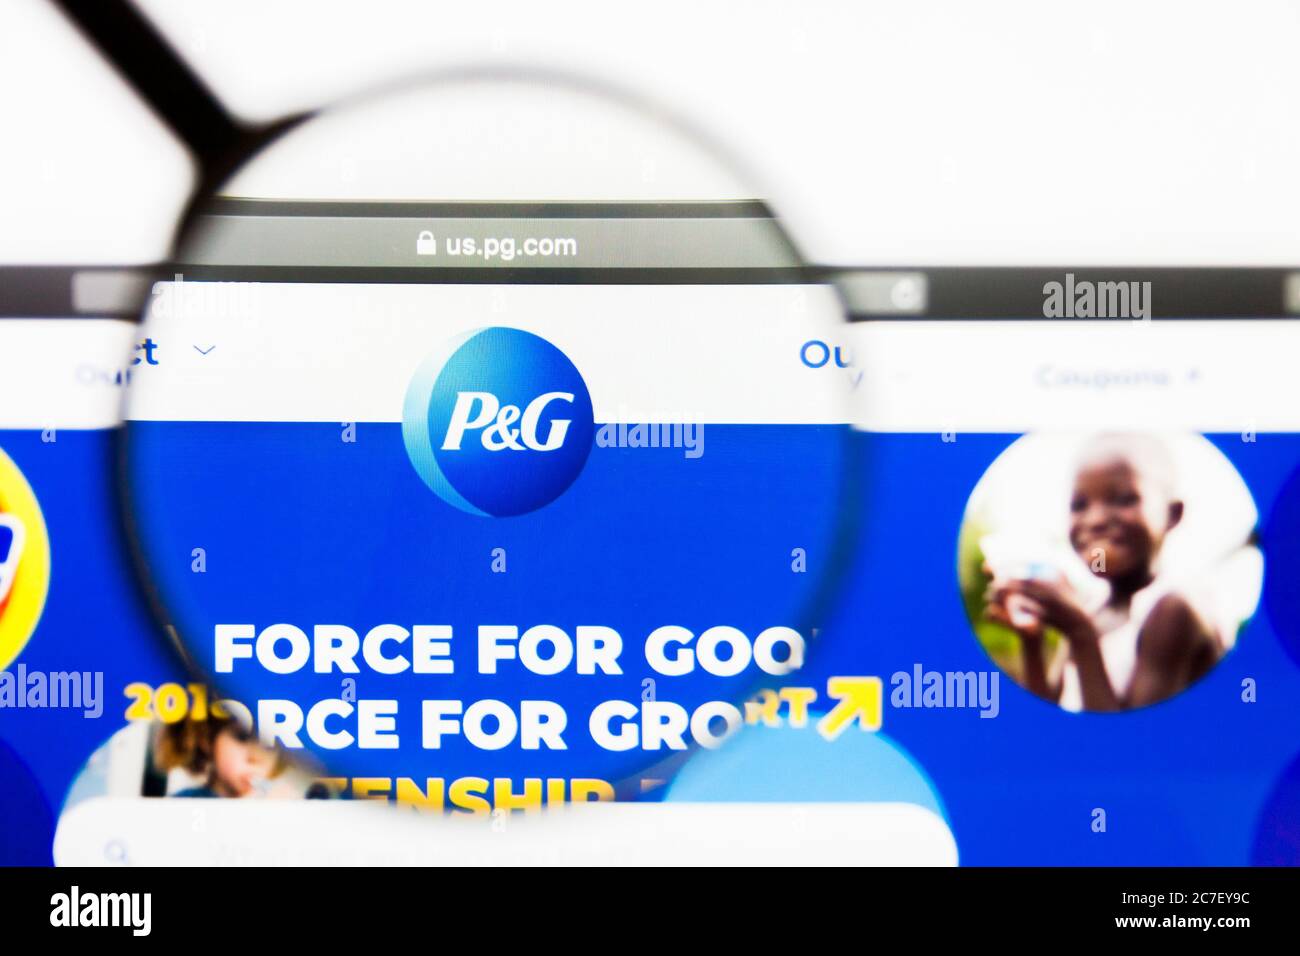 Los Angeles, California, USA - 13 March 2019: Illustrative Editorial, Procter and Gamble website homepage. Procter and Gamble logo visible on display Stock Photo